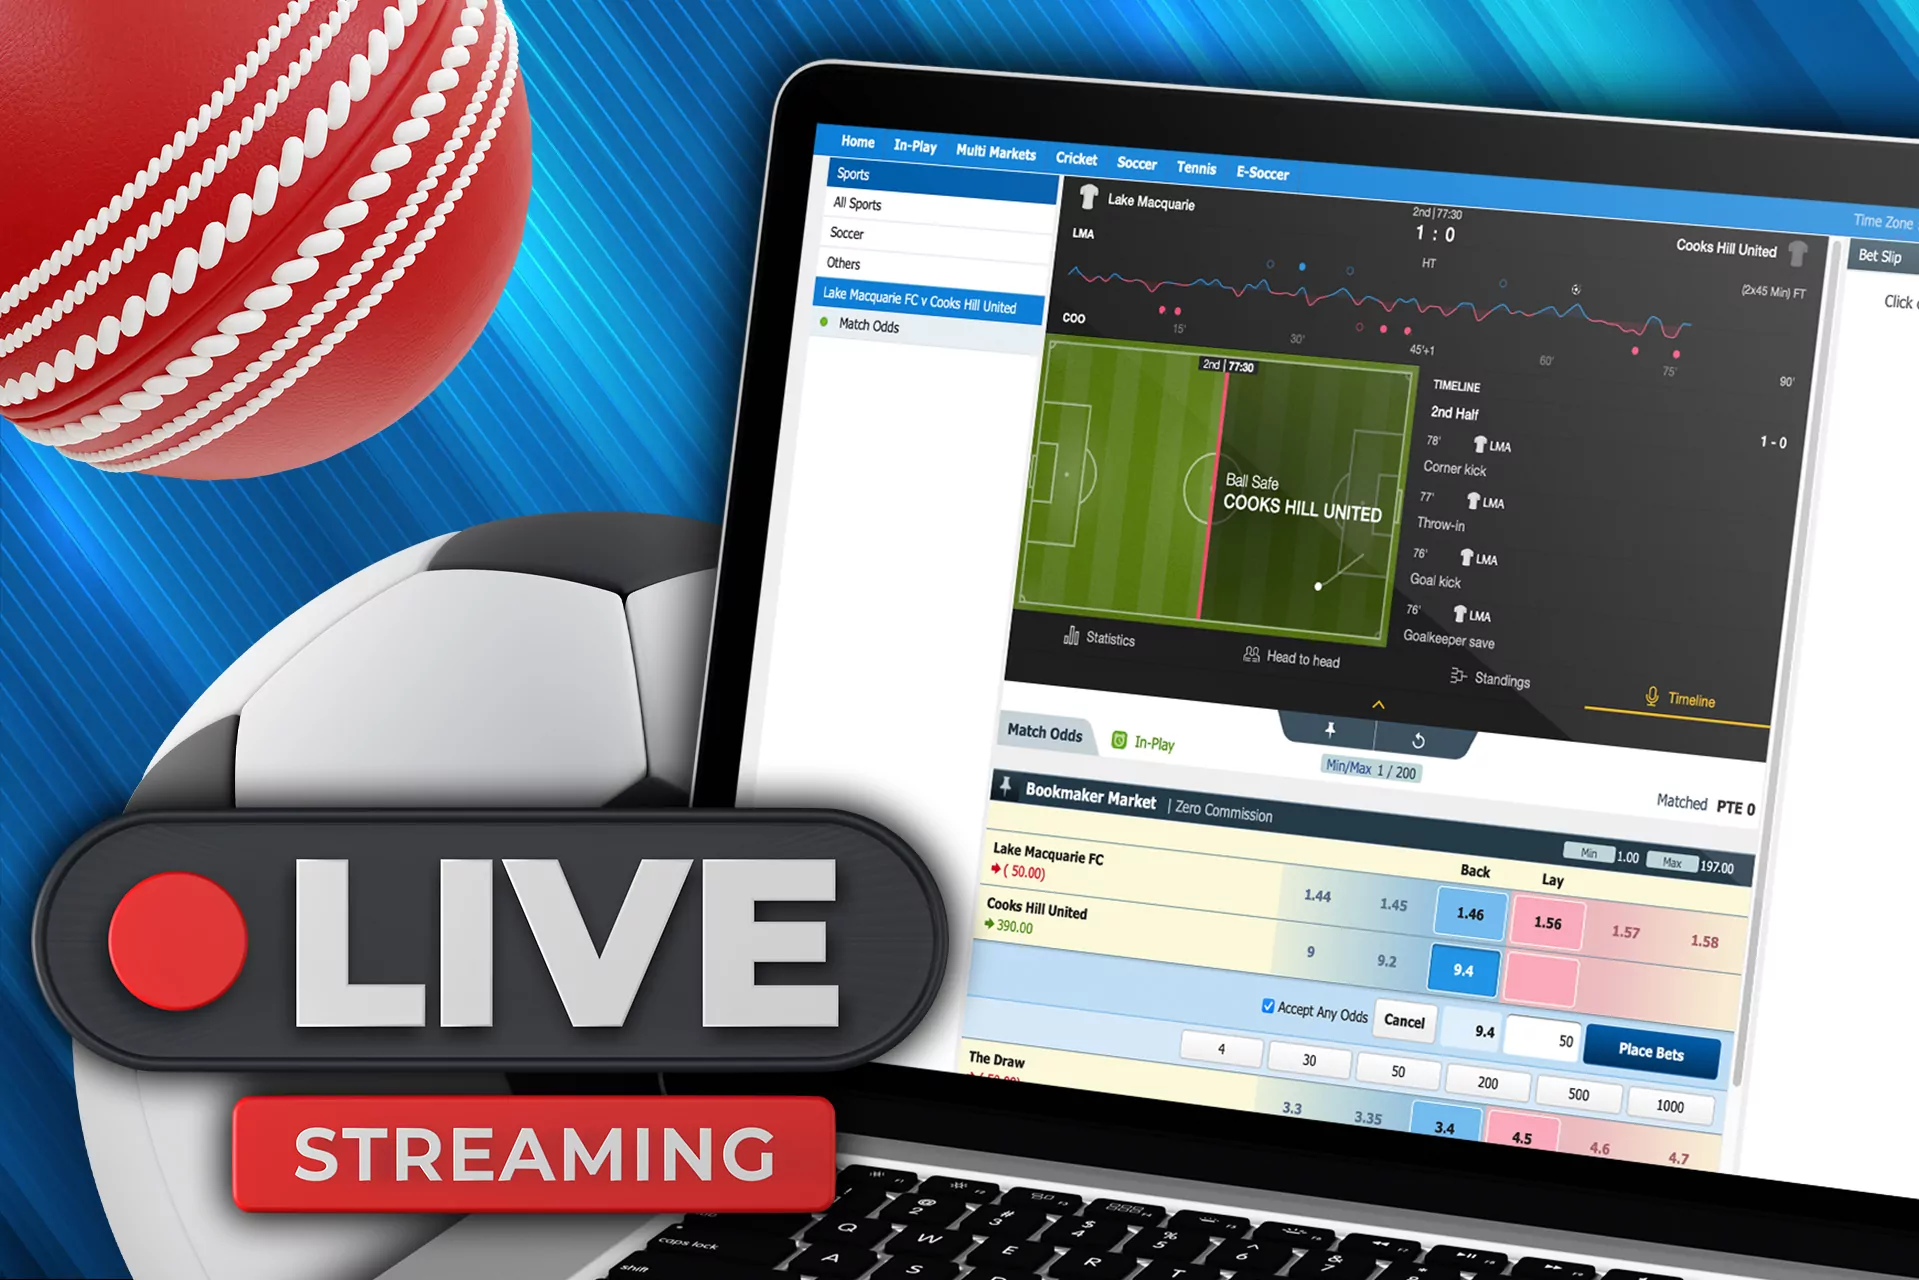 Crickex streams the sports events, so you can watch them and bet.